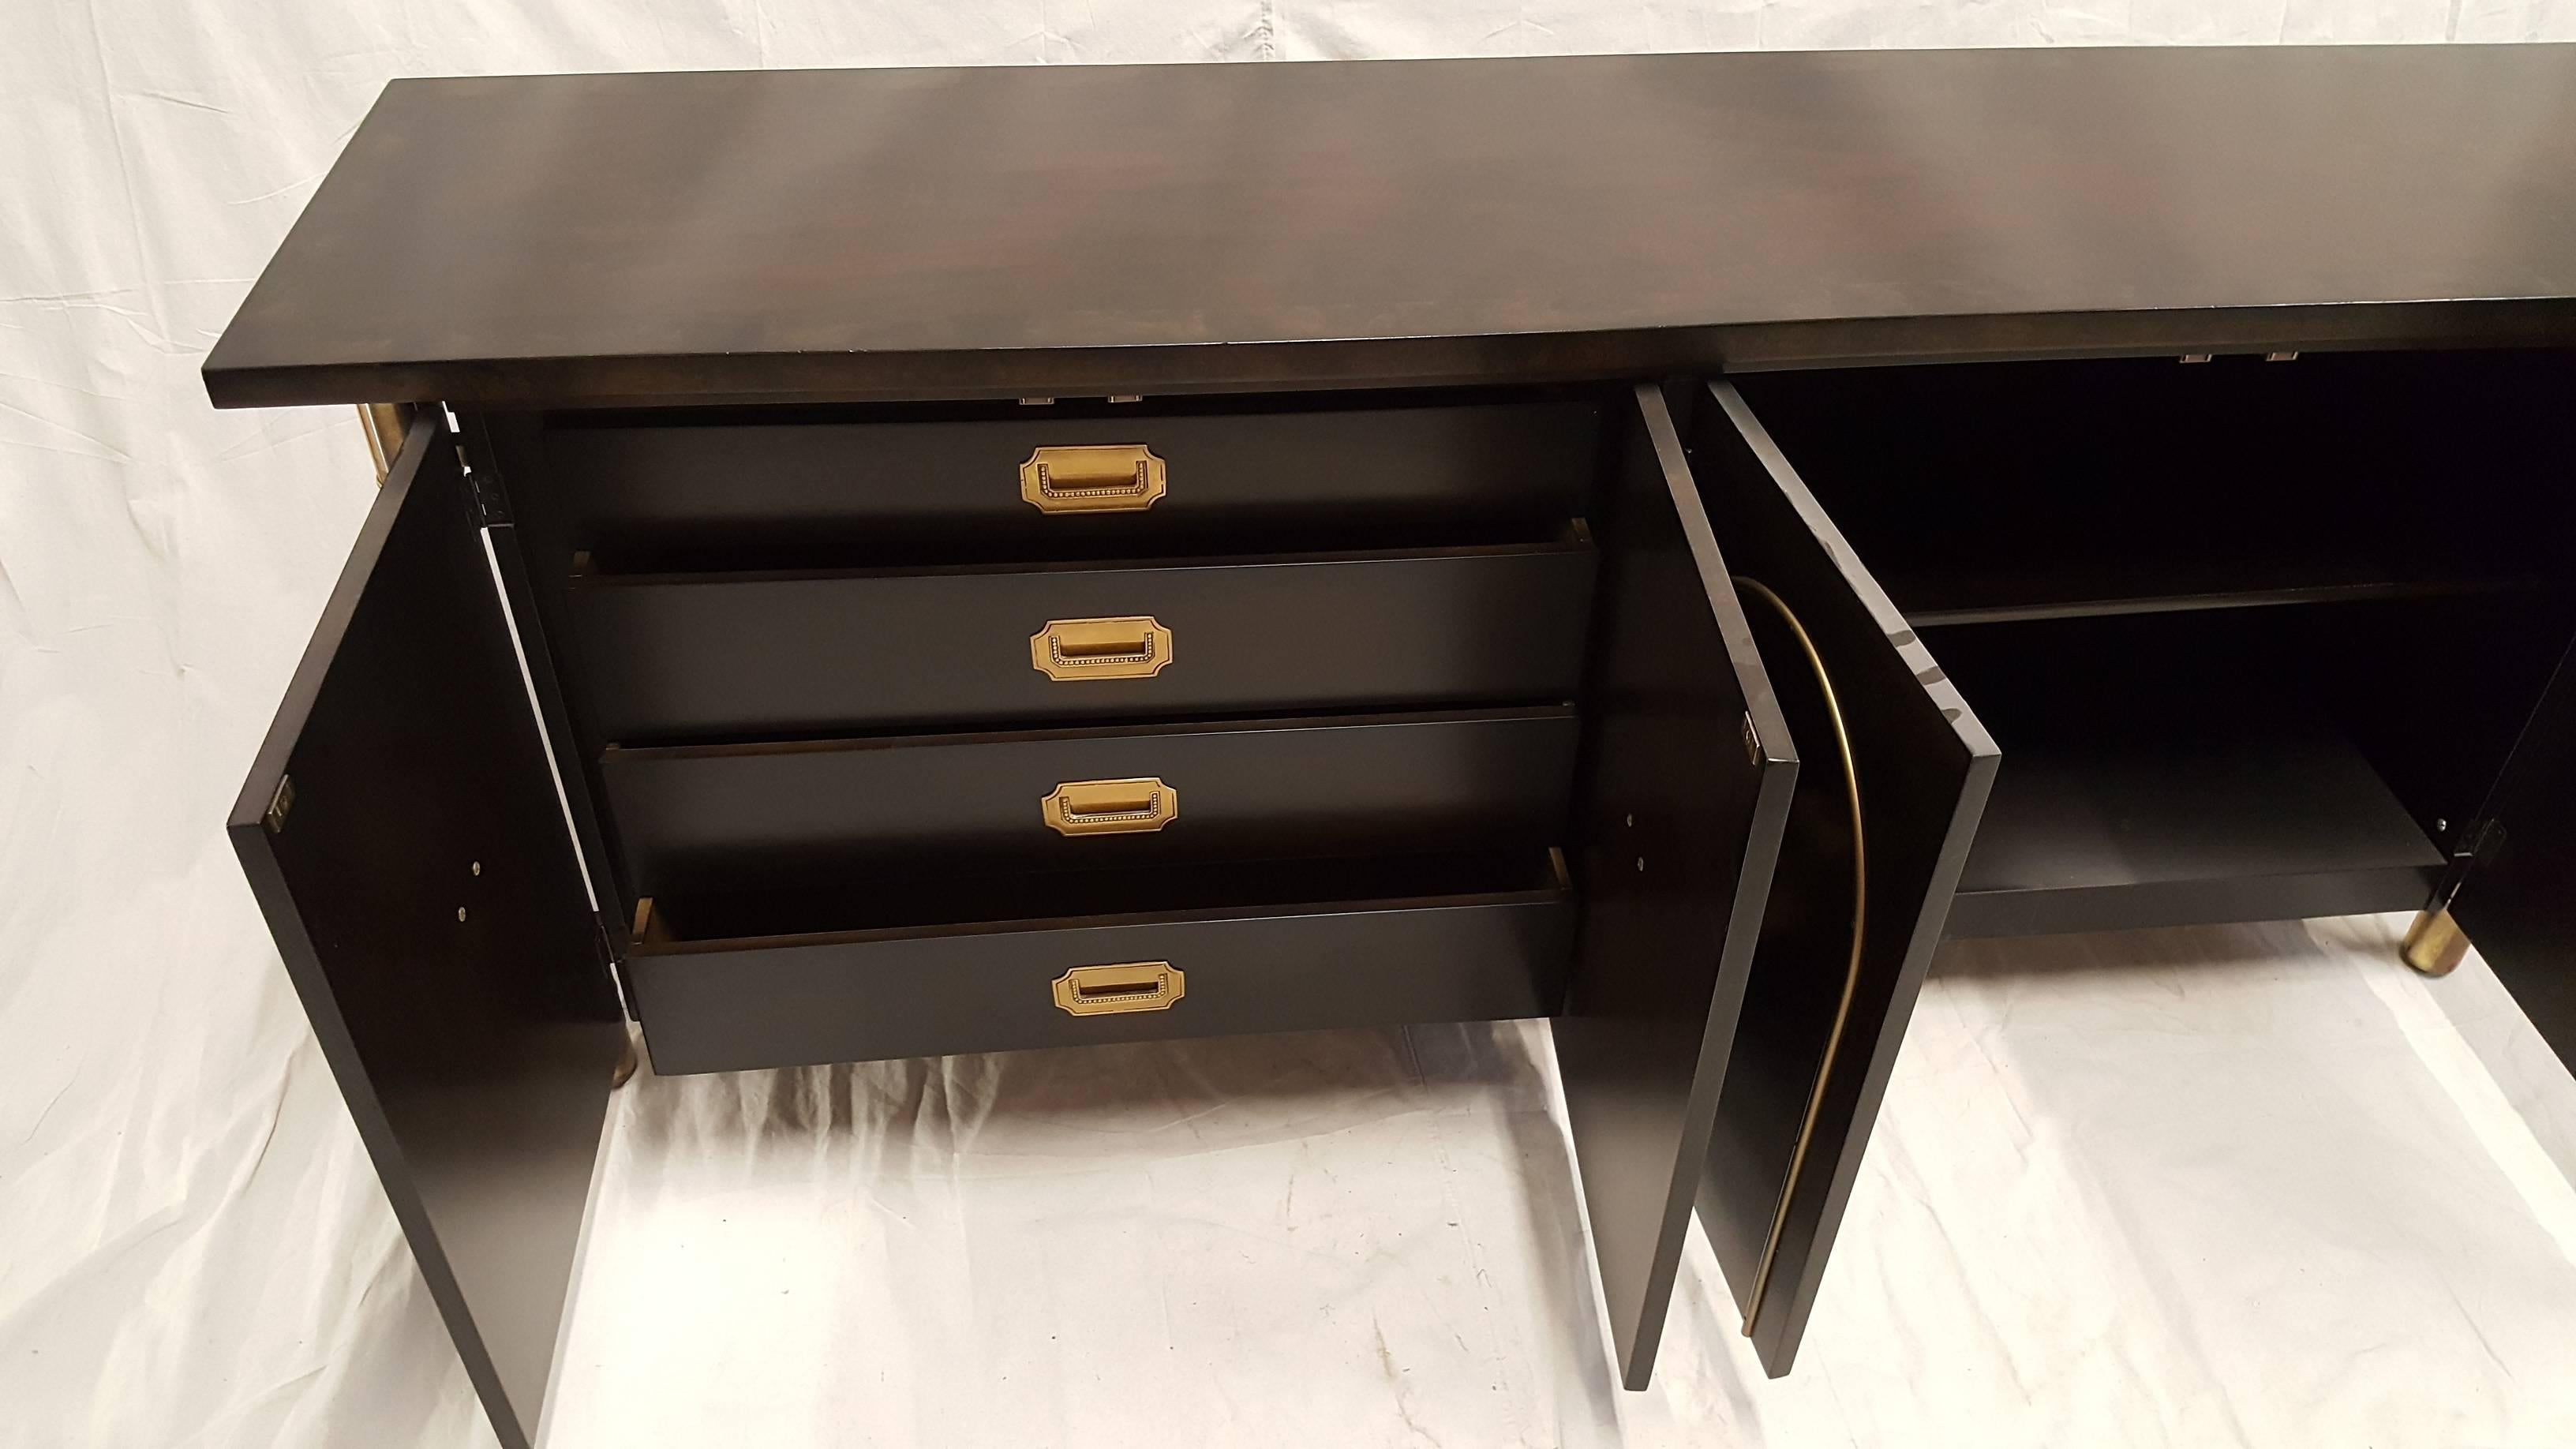 Mastercraft buffet with Amboyna wood with brass legs and hardware. Inside of cabinet doors are four draws. The top has a burl trim around the edge.